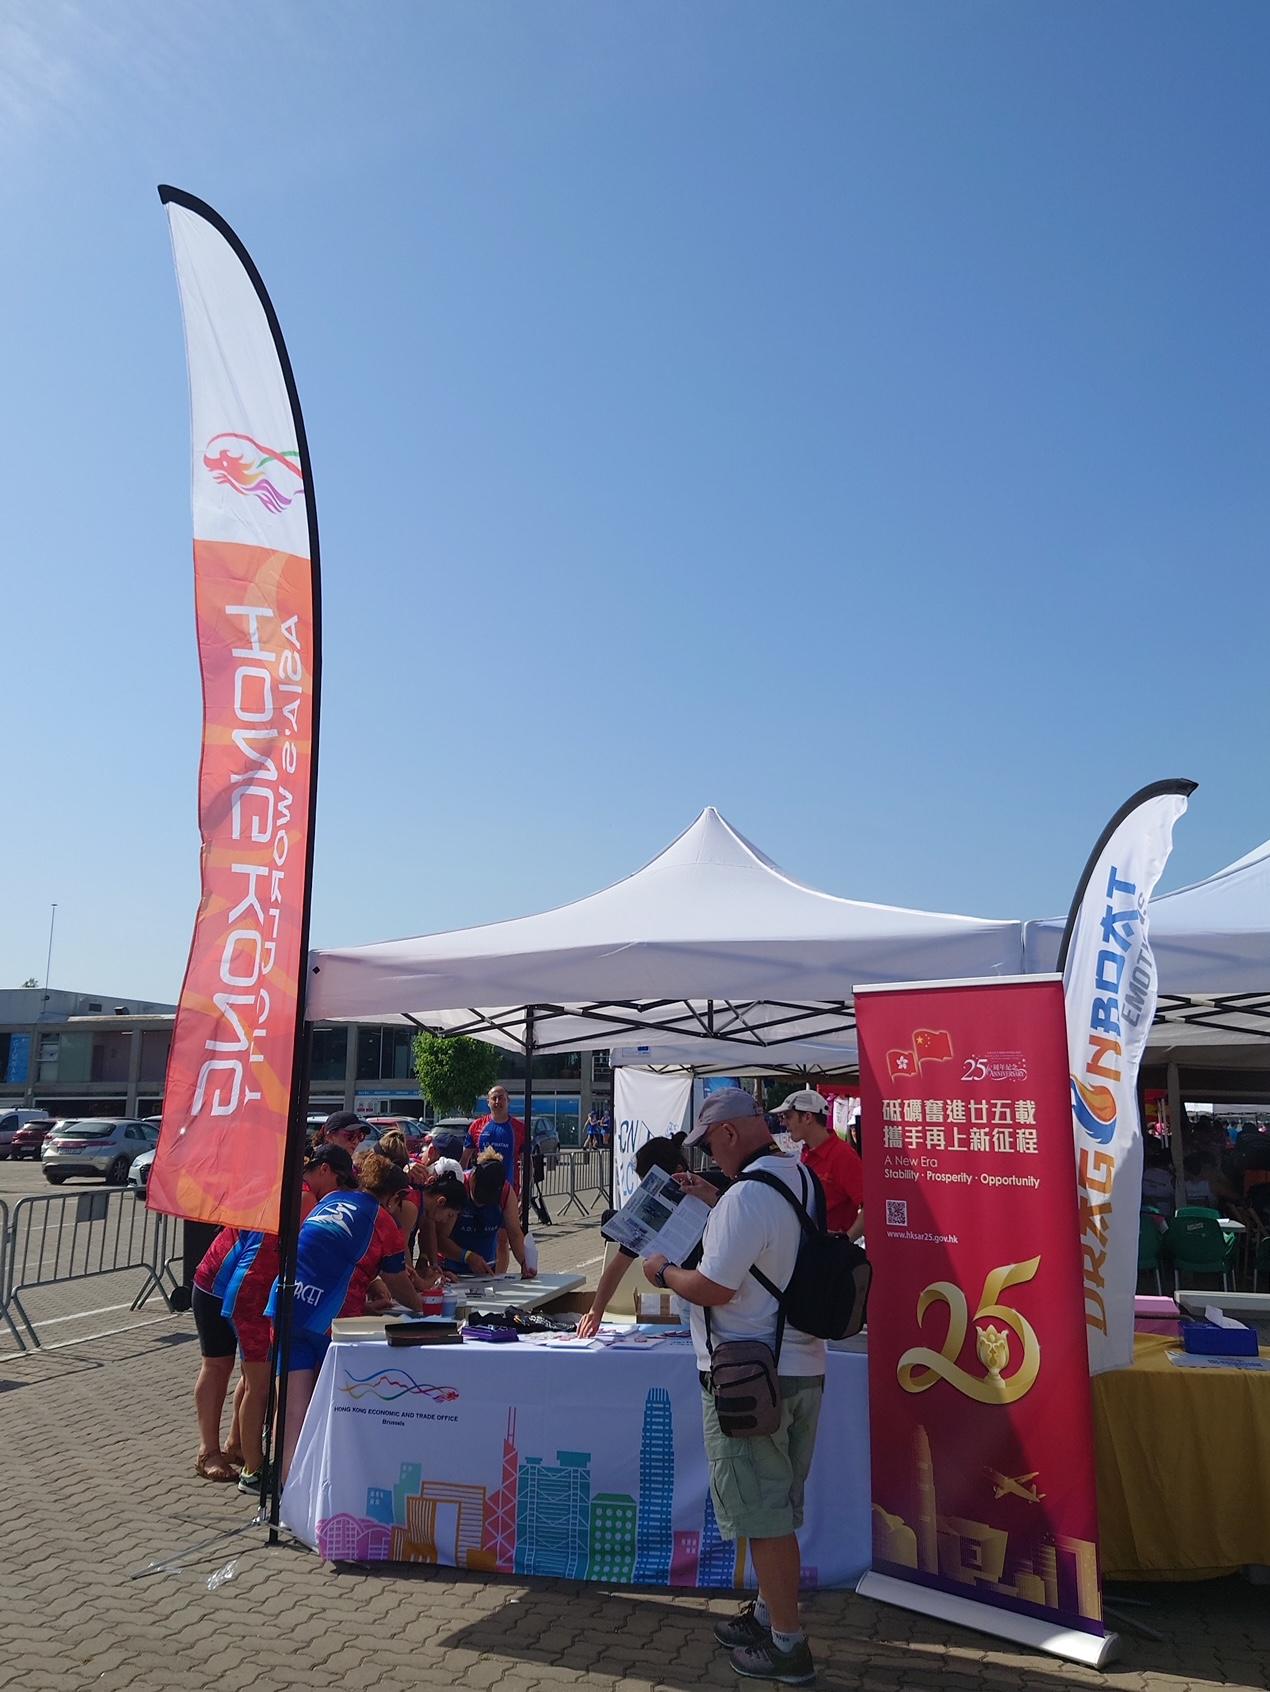 The 3rd Barcelona Hong Kong International Dragon Boat Festival (the Festival) was held on May 21-22(Barcelona Time) in Castelldefels, Barcelona in Spain. Photo shows visitors at the Hong Kong booth at the Barcelona Hong Kong International Dragon Boat Festival. 